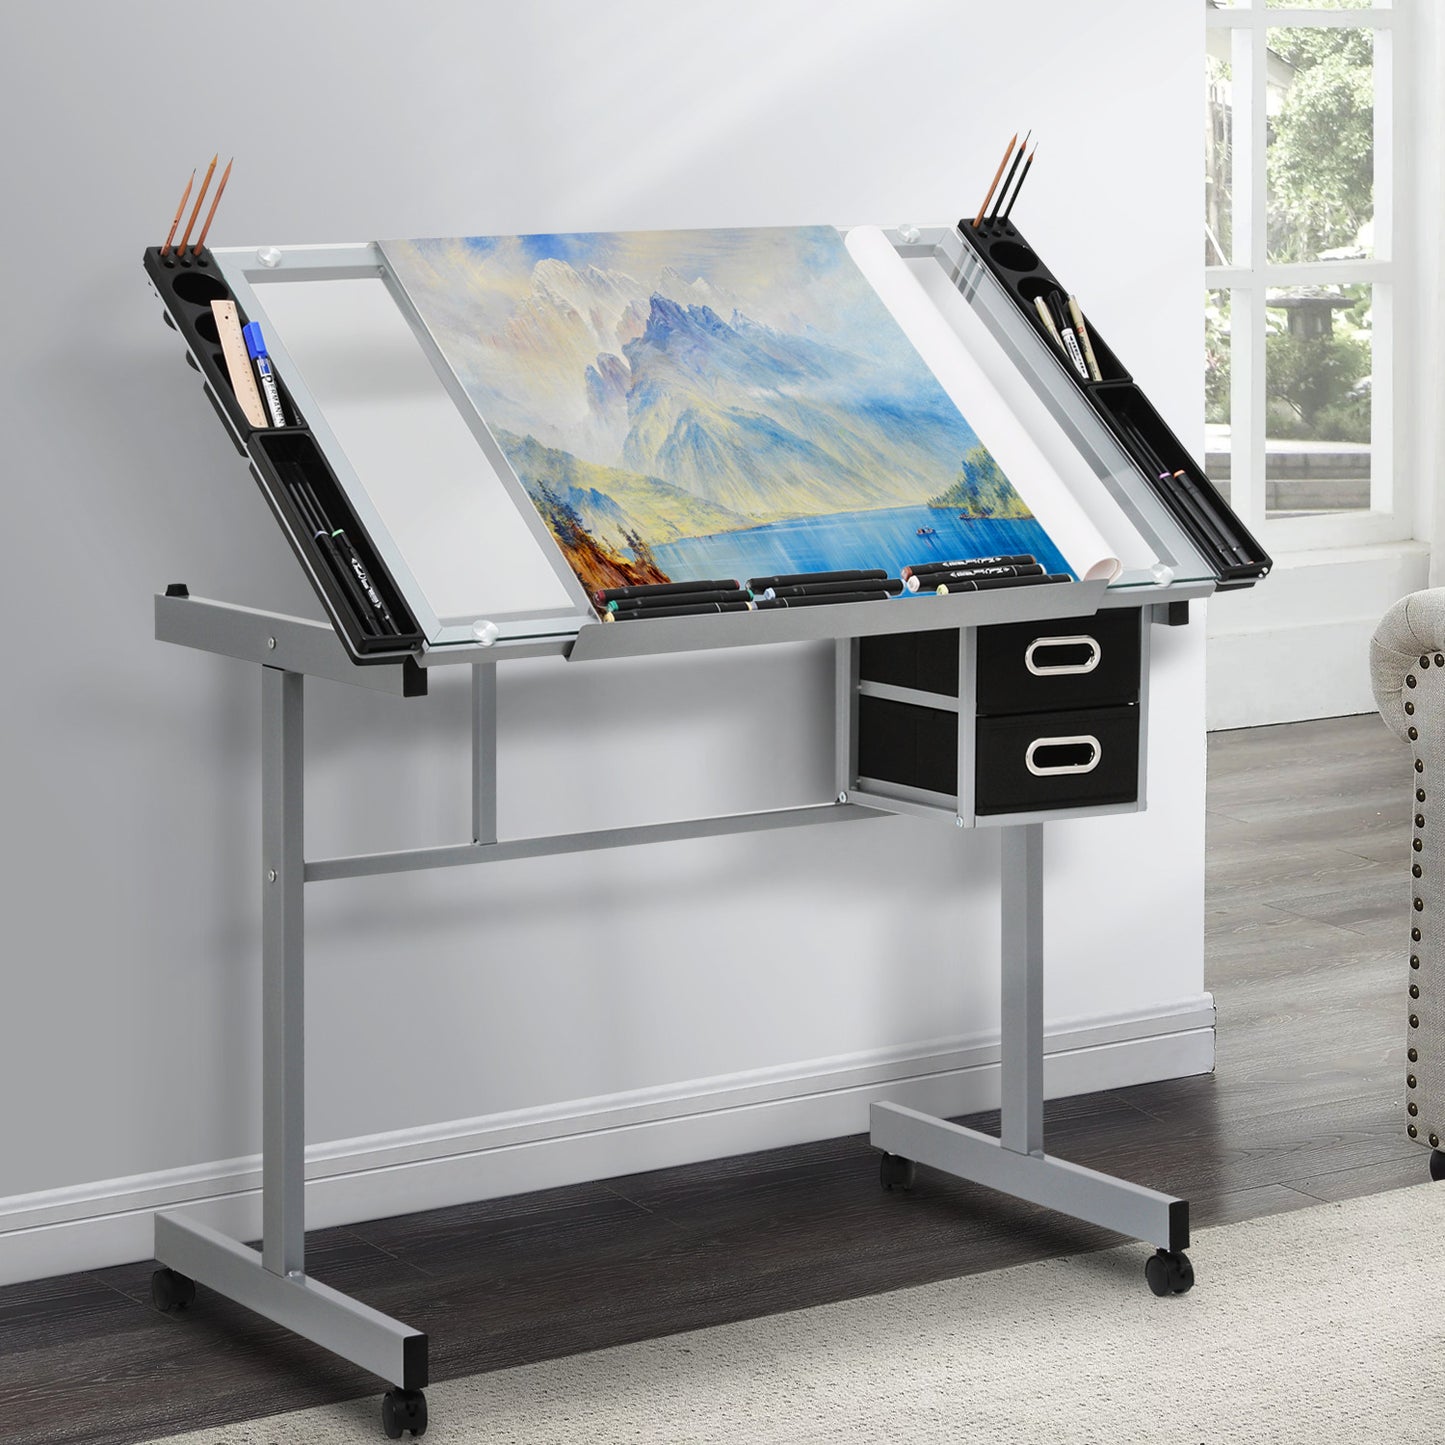 Drafting Table - 41" Crystal desktop with grey frame, 2 black drawers, rolling casters